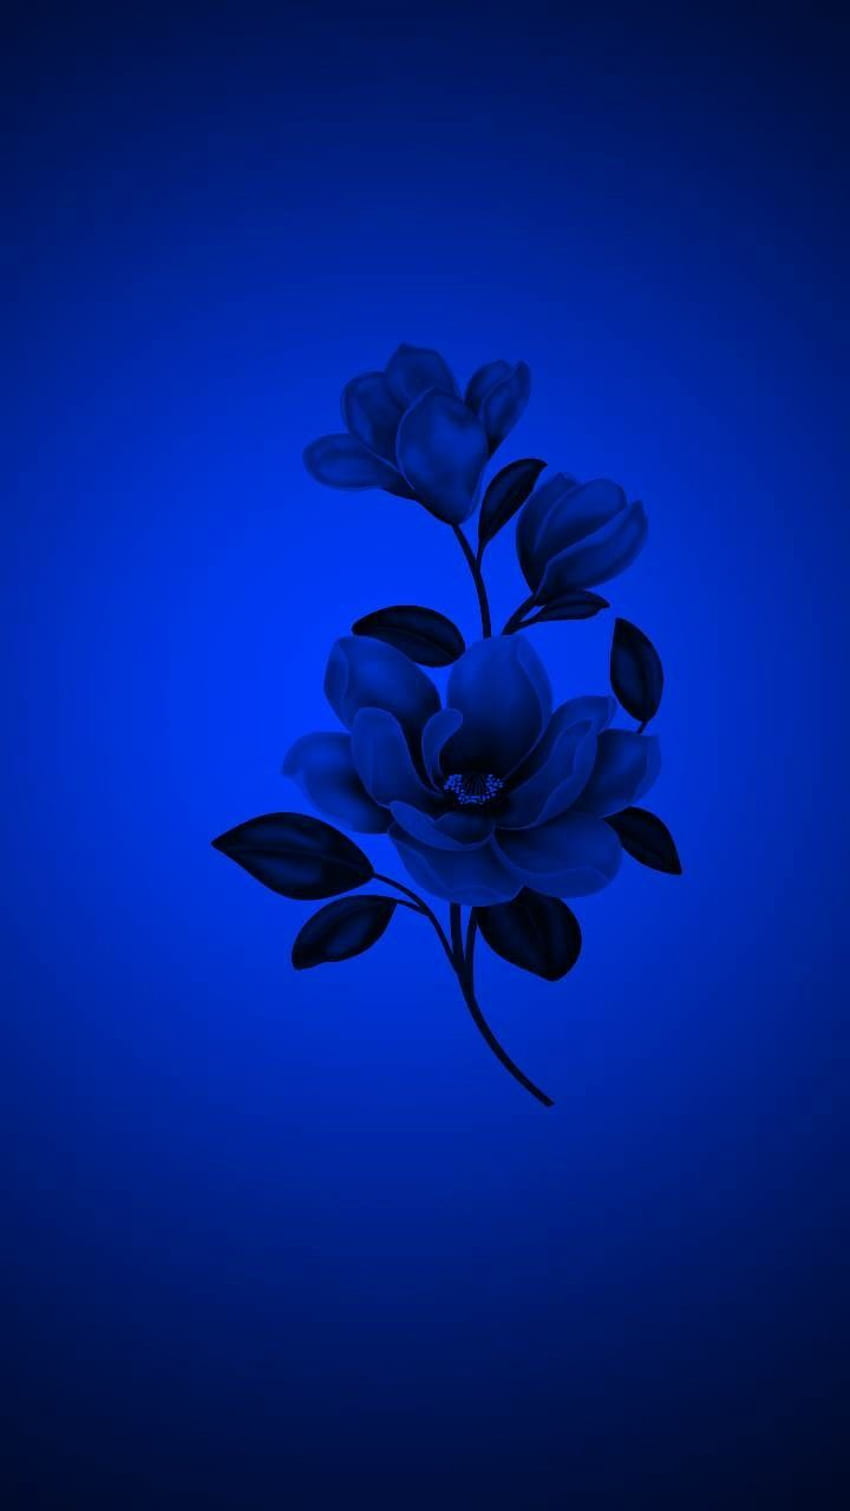 Royal blue wallpaper Images - Search Images on Everypixel